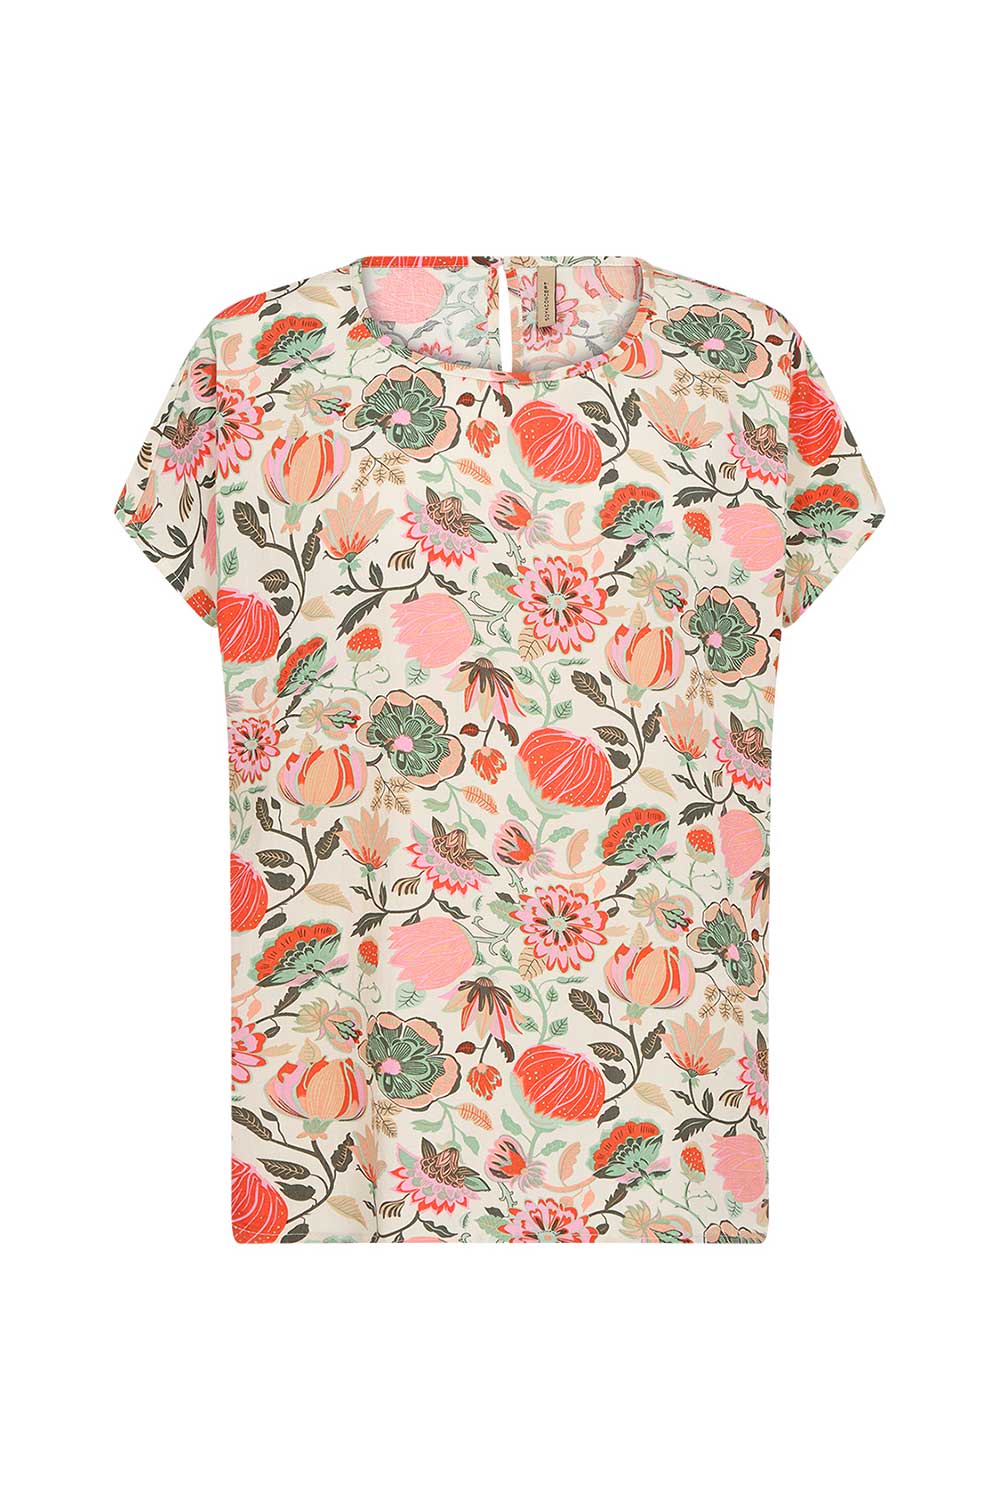 Soya Concept (40579) Women's Short Sleeve Graphic Floral Blouse in a Peach Floral Print With PInk & Green Hues over a Cream Background 